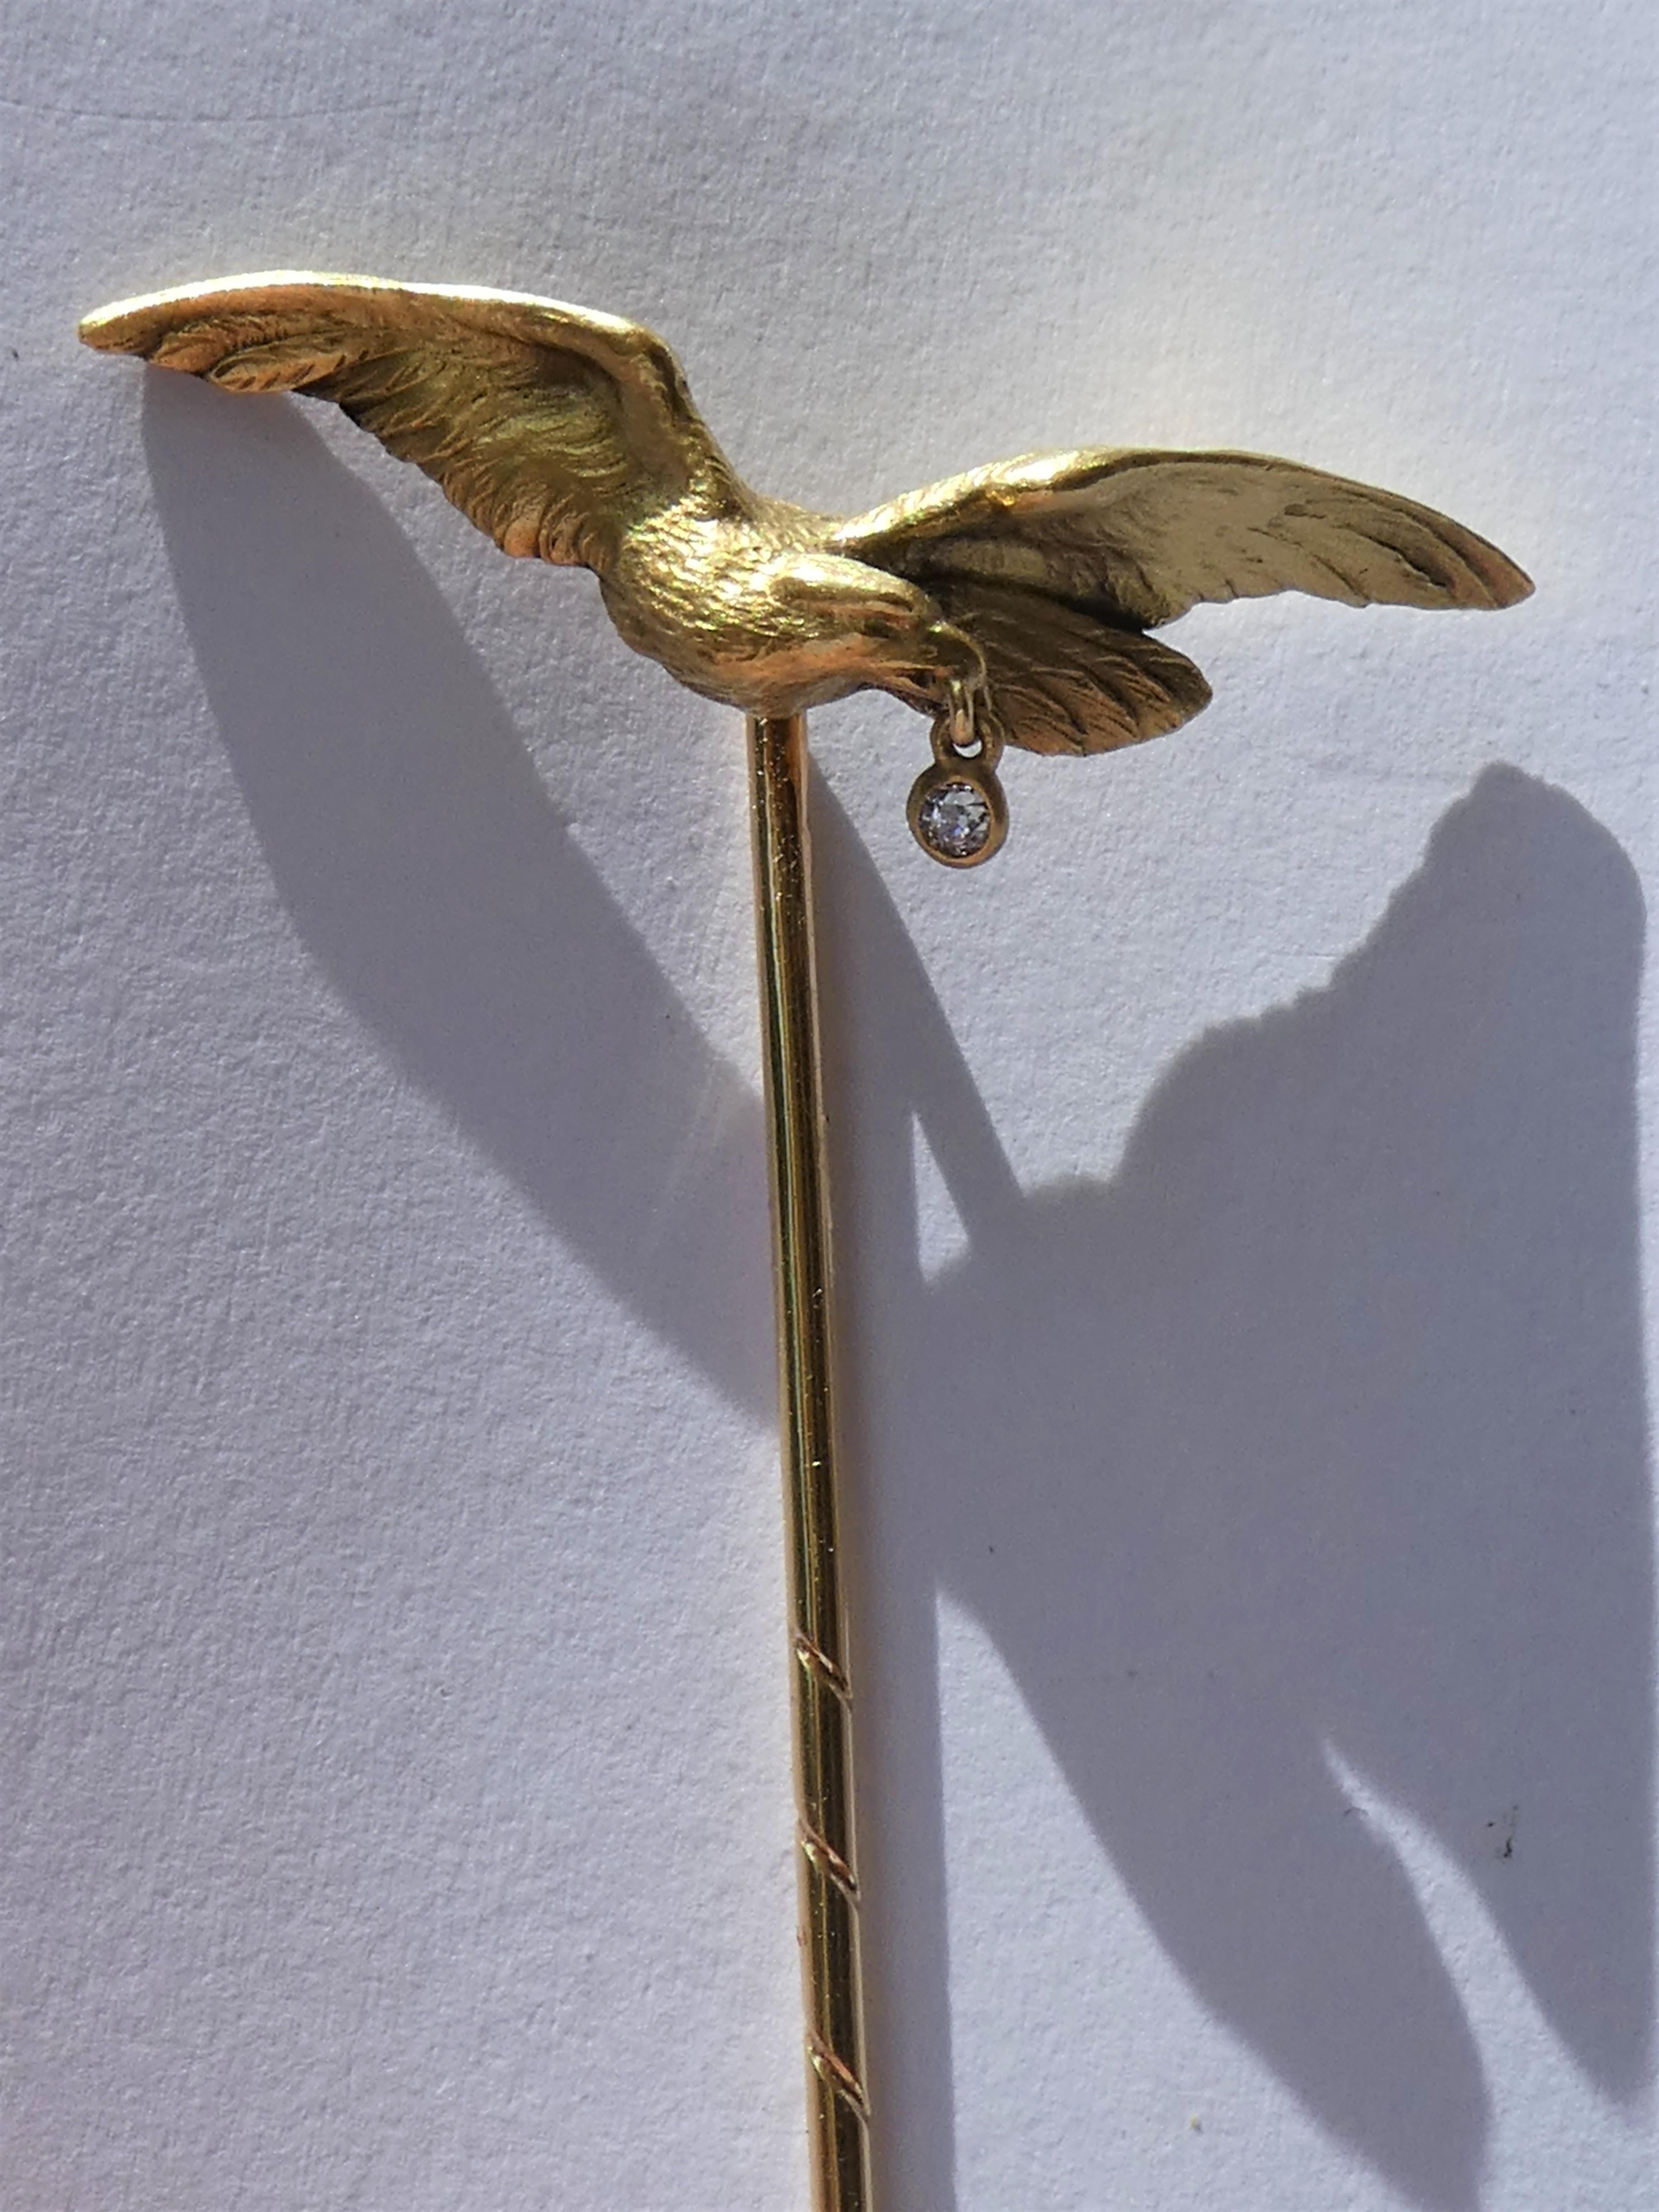 This magnificent stickpin was crafted in Vienna around 1900 by a goldsmith with the initials A  & F in 14 karat brushed yellow gold. The craftmanship of the powerful spread eagle with open wings is detailed. It has this three dimensional look and